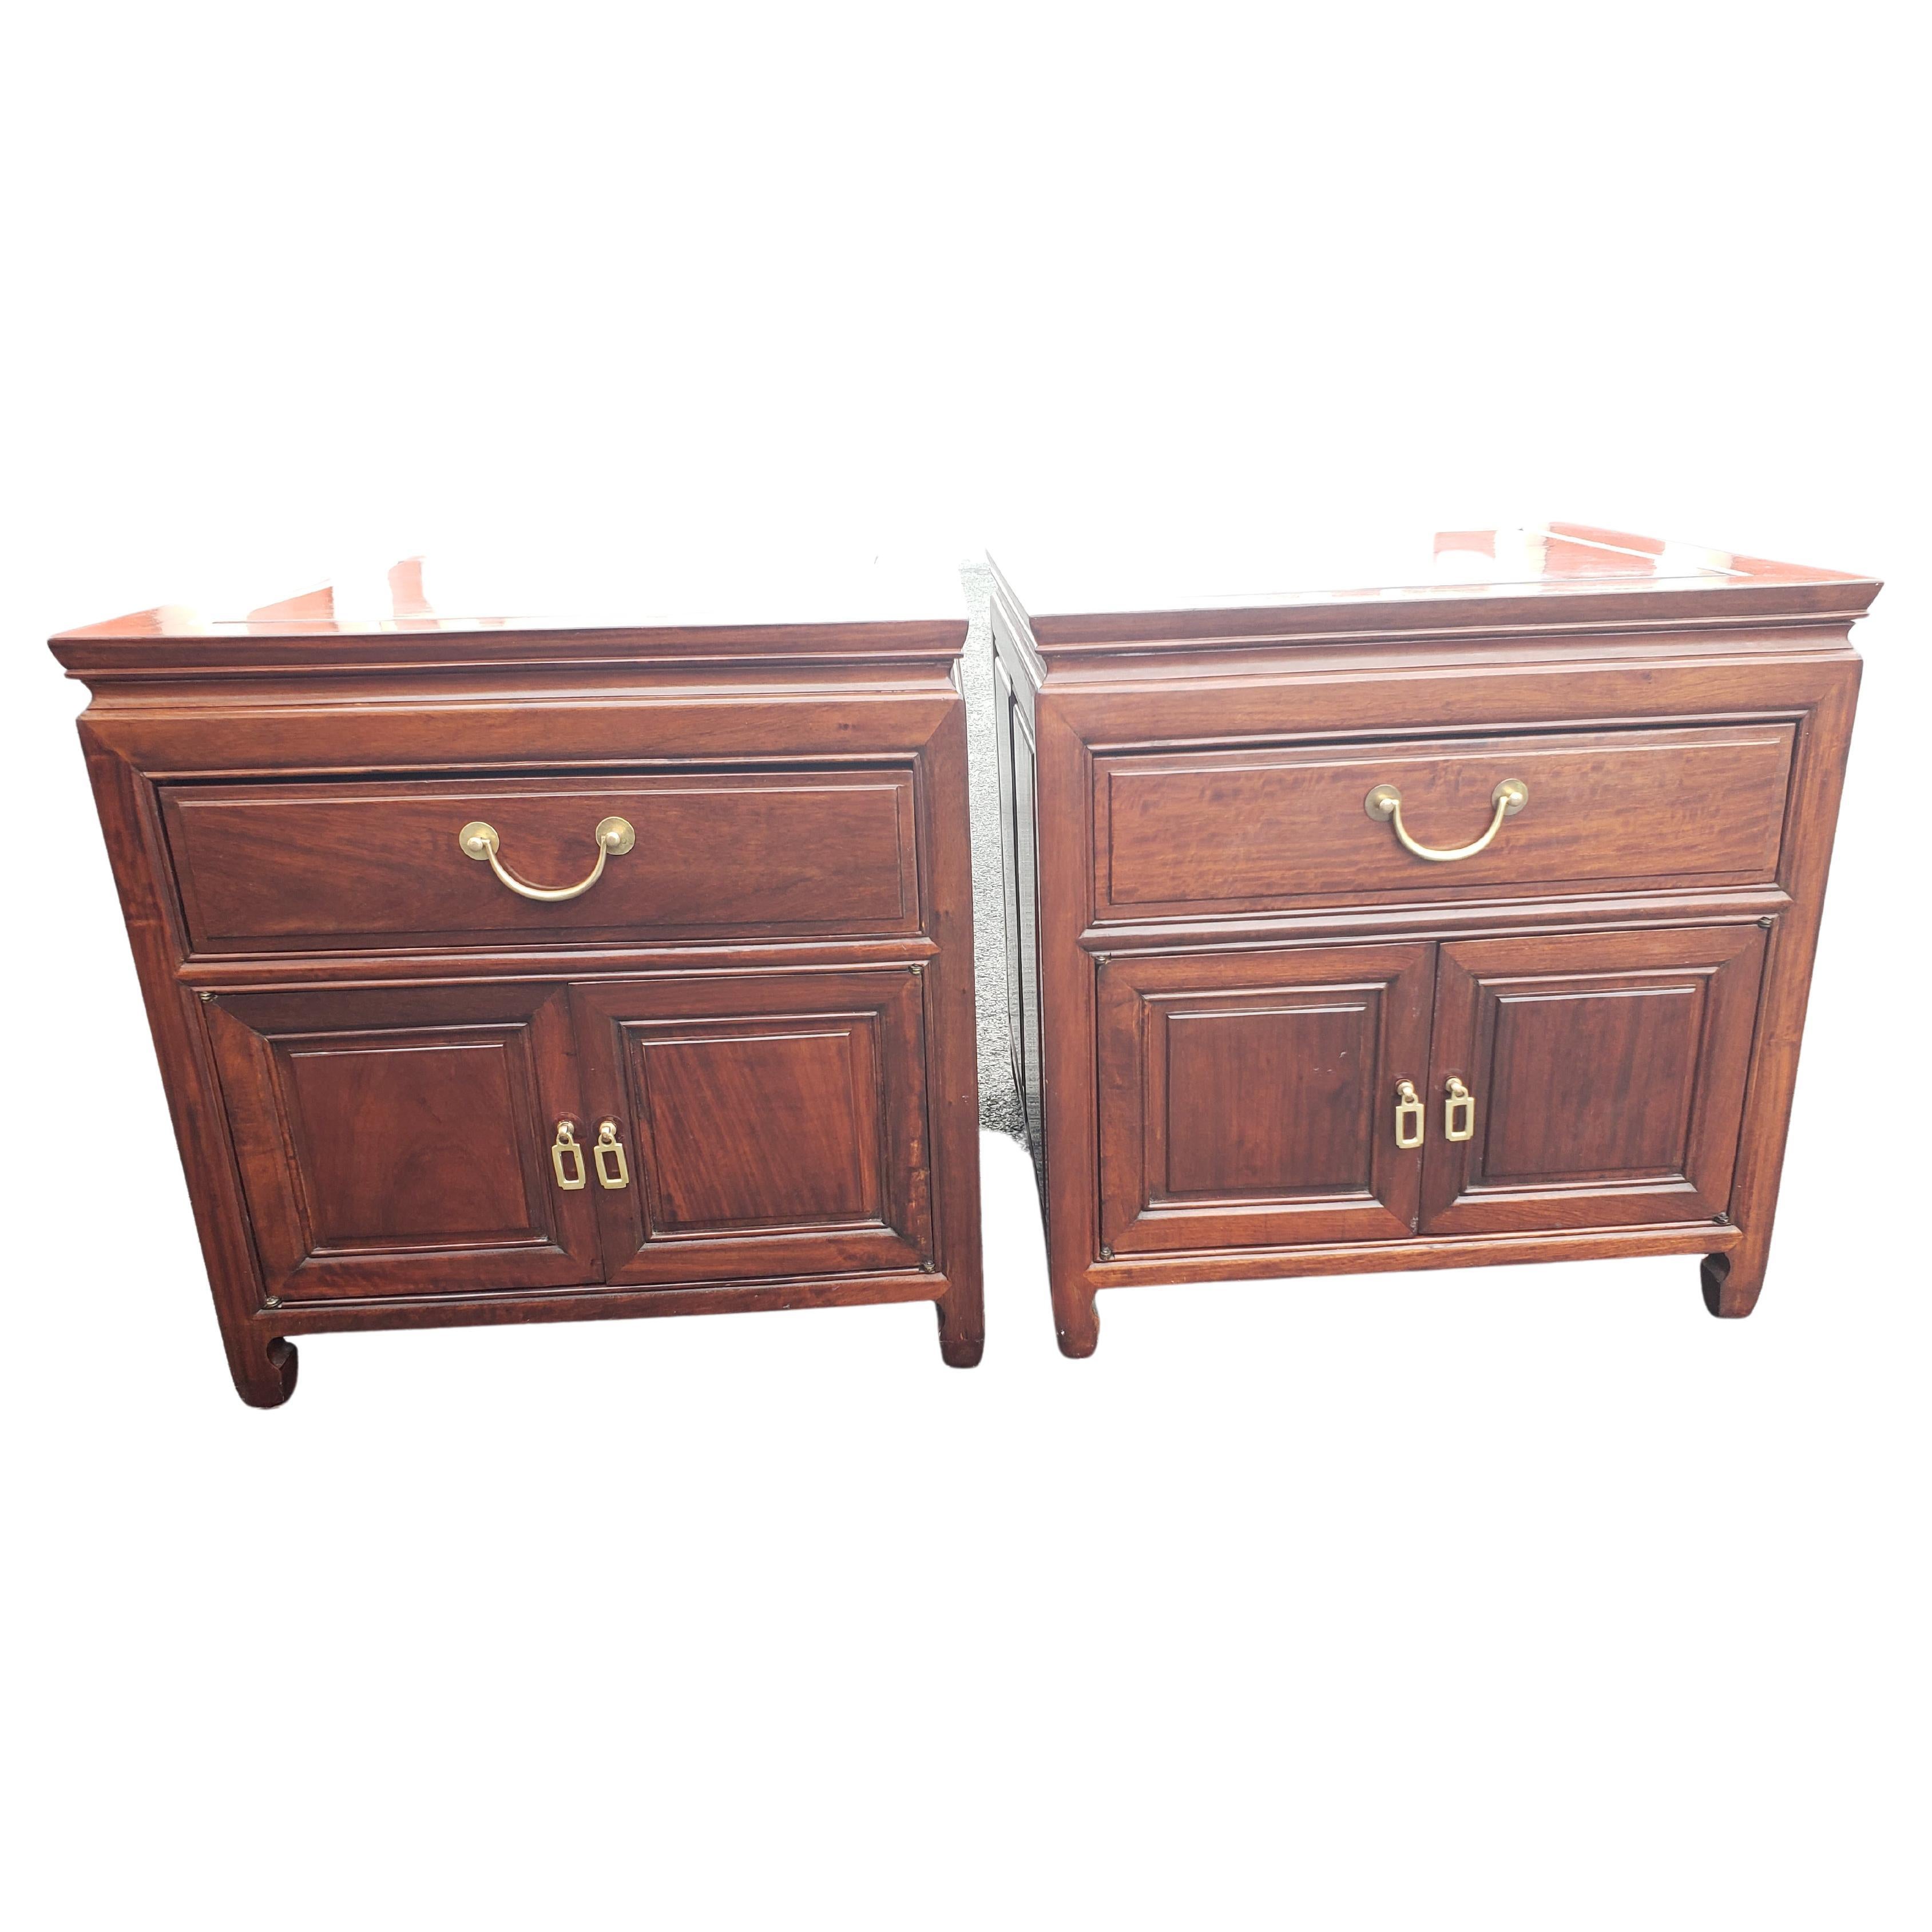 Perfectly handcrafted George Zee attributed Asian American Chippendale Rosewood side tables cabinets. 1 top dovetailed rosewood drawer finished inside out sliding perfectly. Very good vintage condition with very few signs of previous use. Heavy